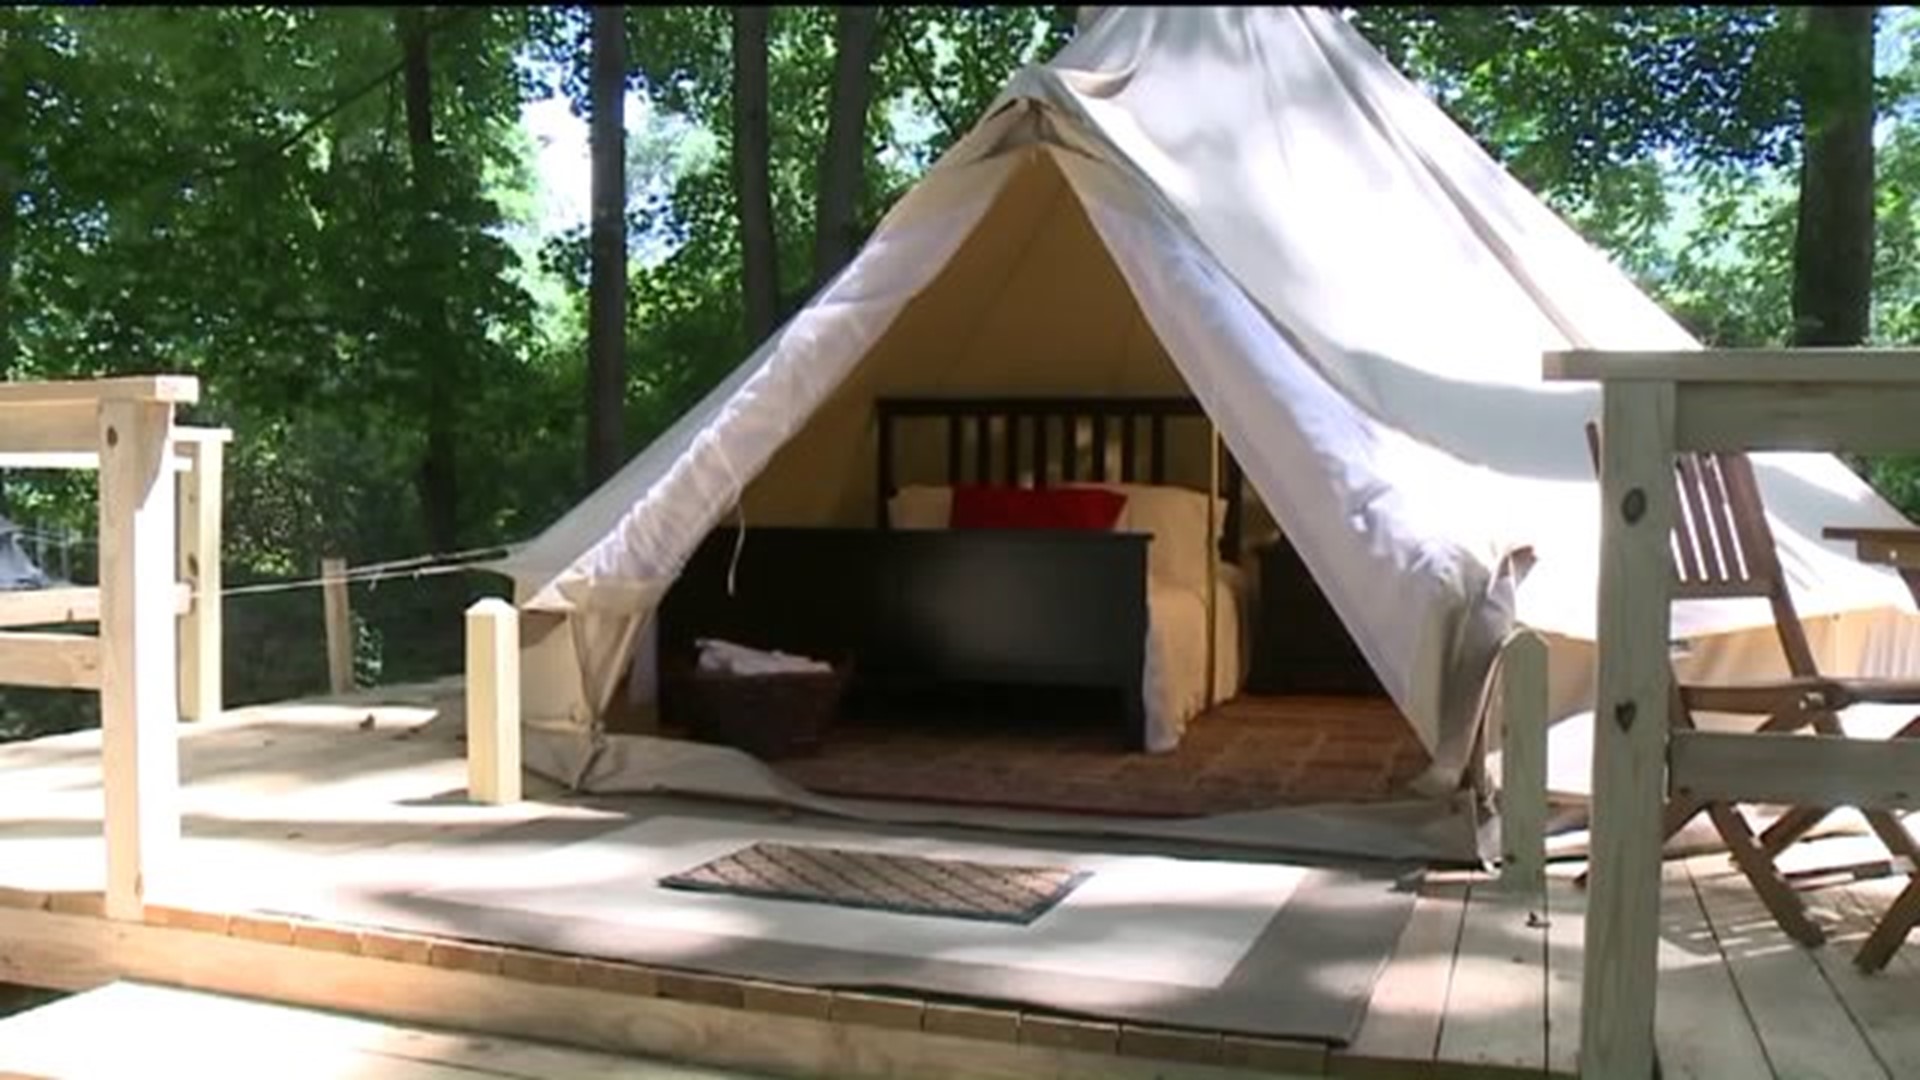 'Glamping' in the Great Outdoors